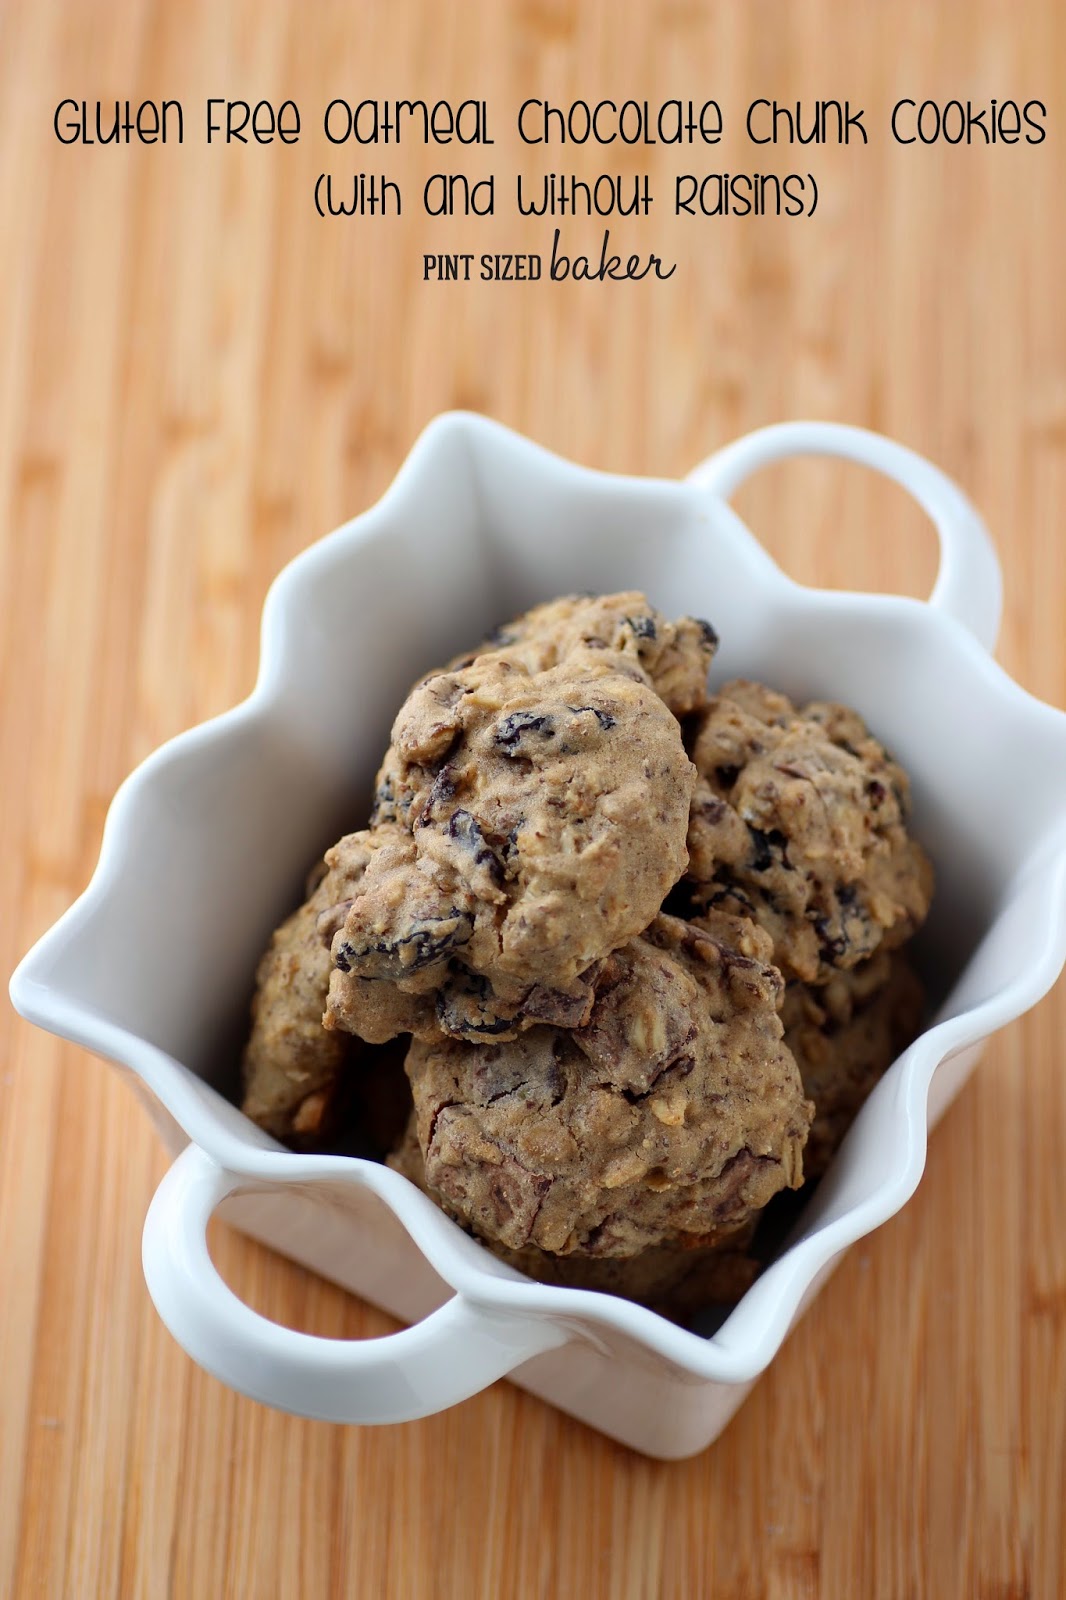 A great recipe for Gluten Free Oatmeal Chocolate Chunk Cookies. The raisins are totally optional, but I loved them!